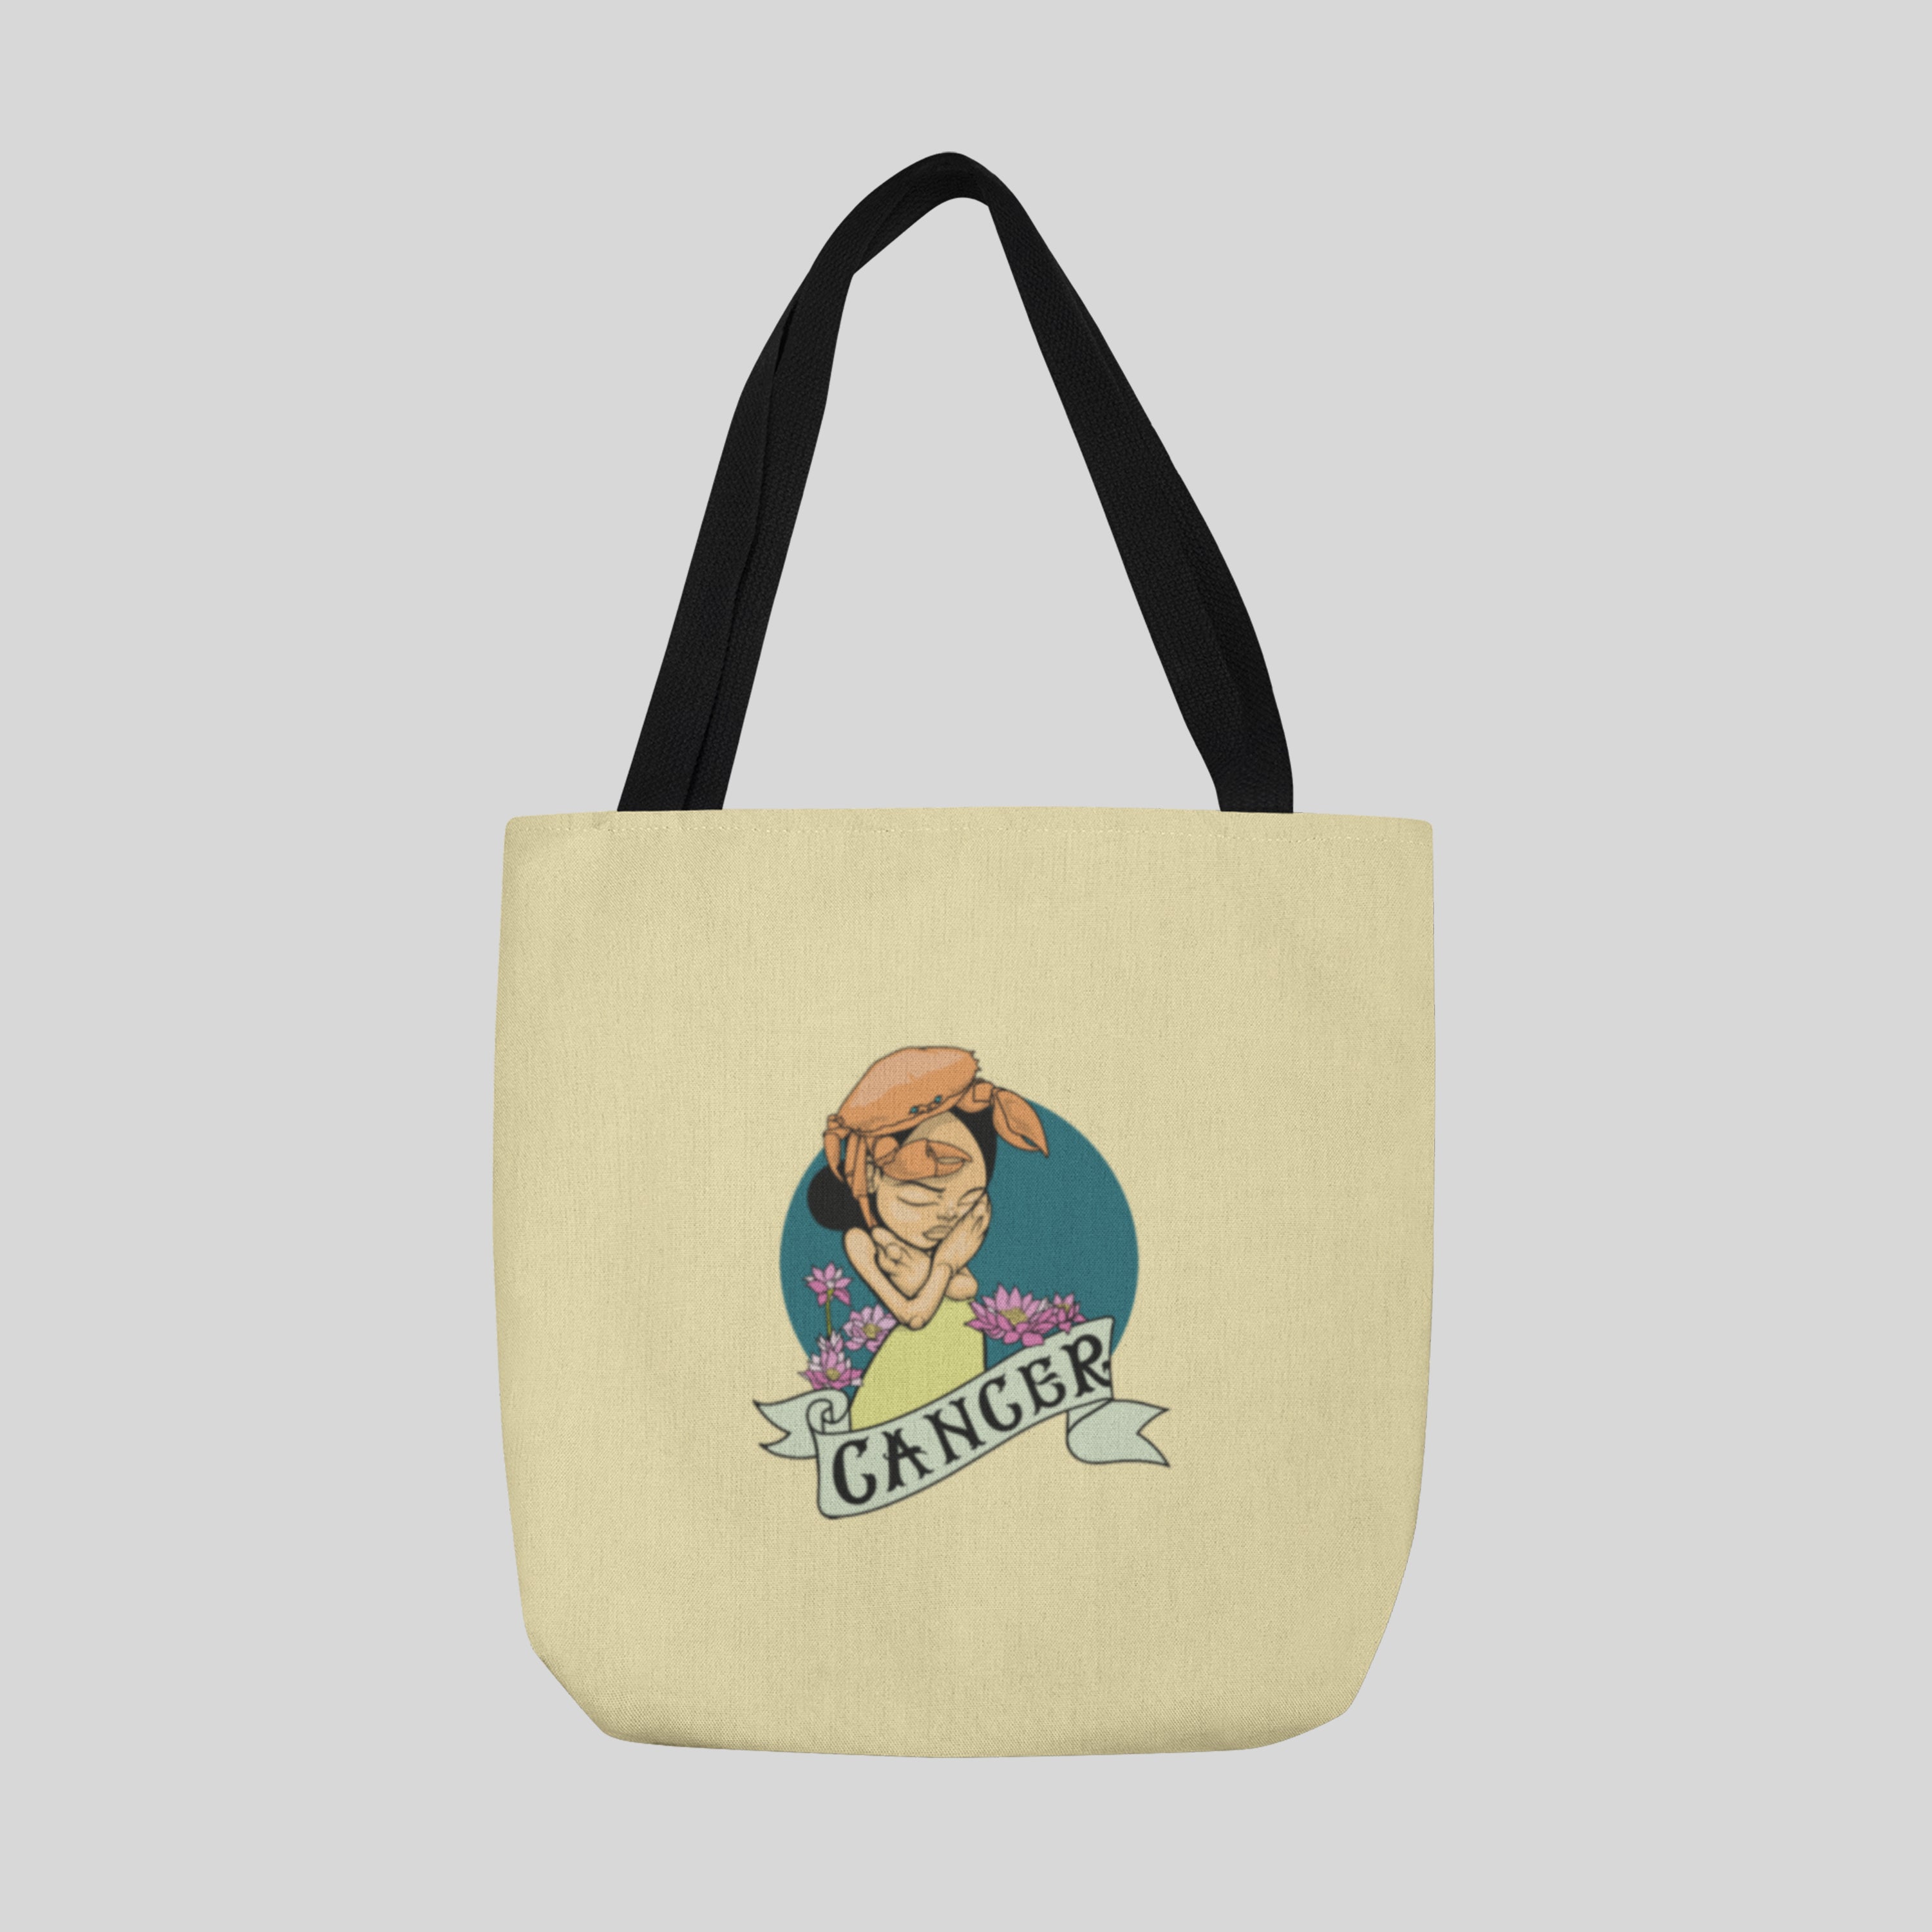 CANCER BY SAM FLORES TOTE